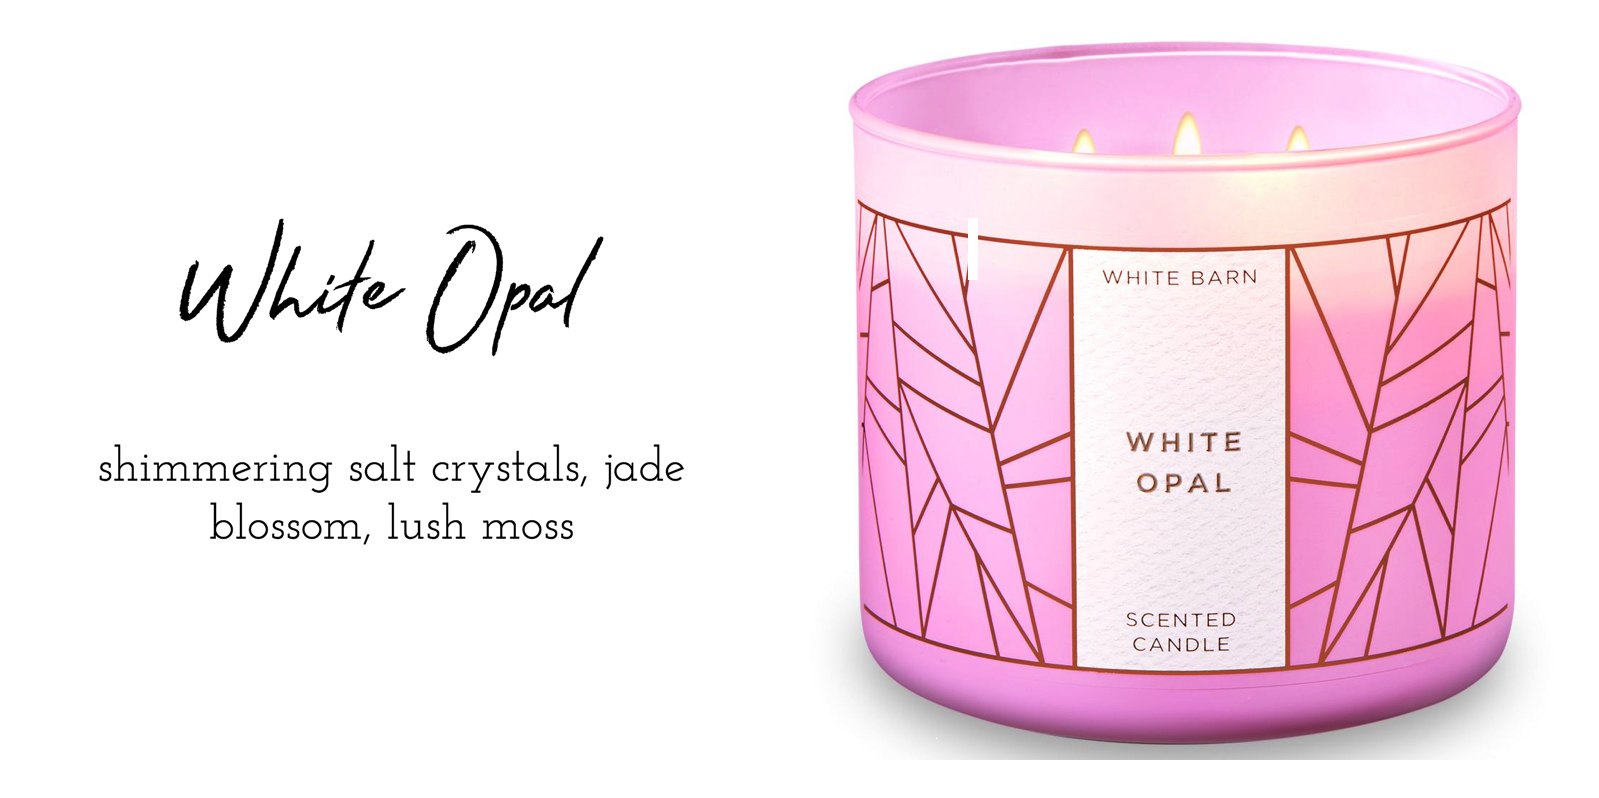 whiteopal bath and body works candles